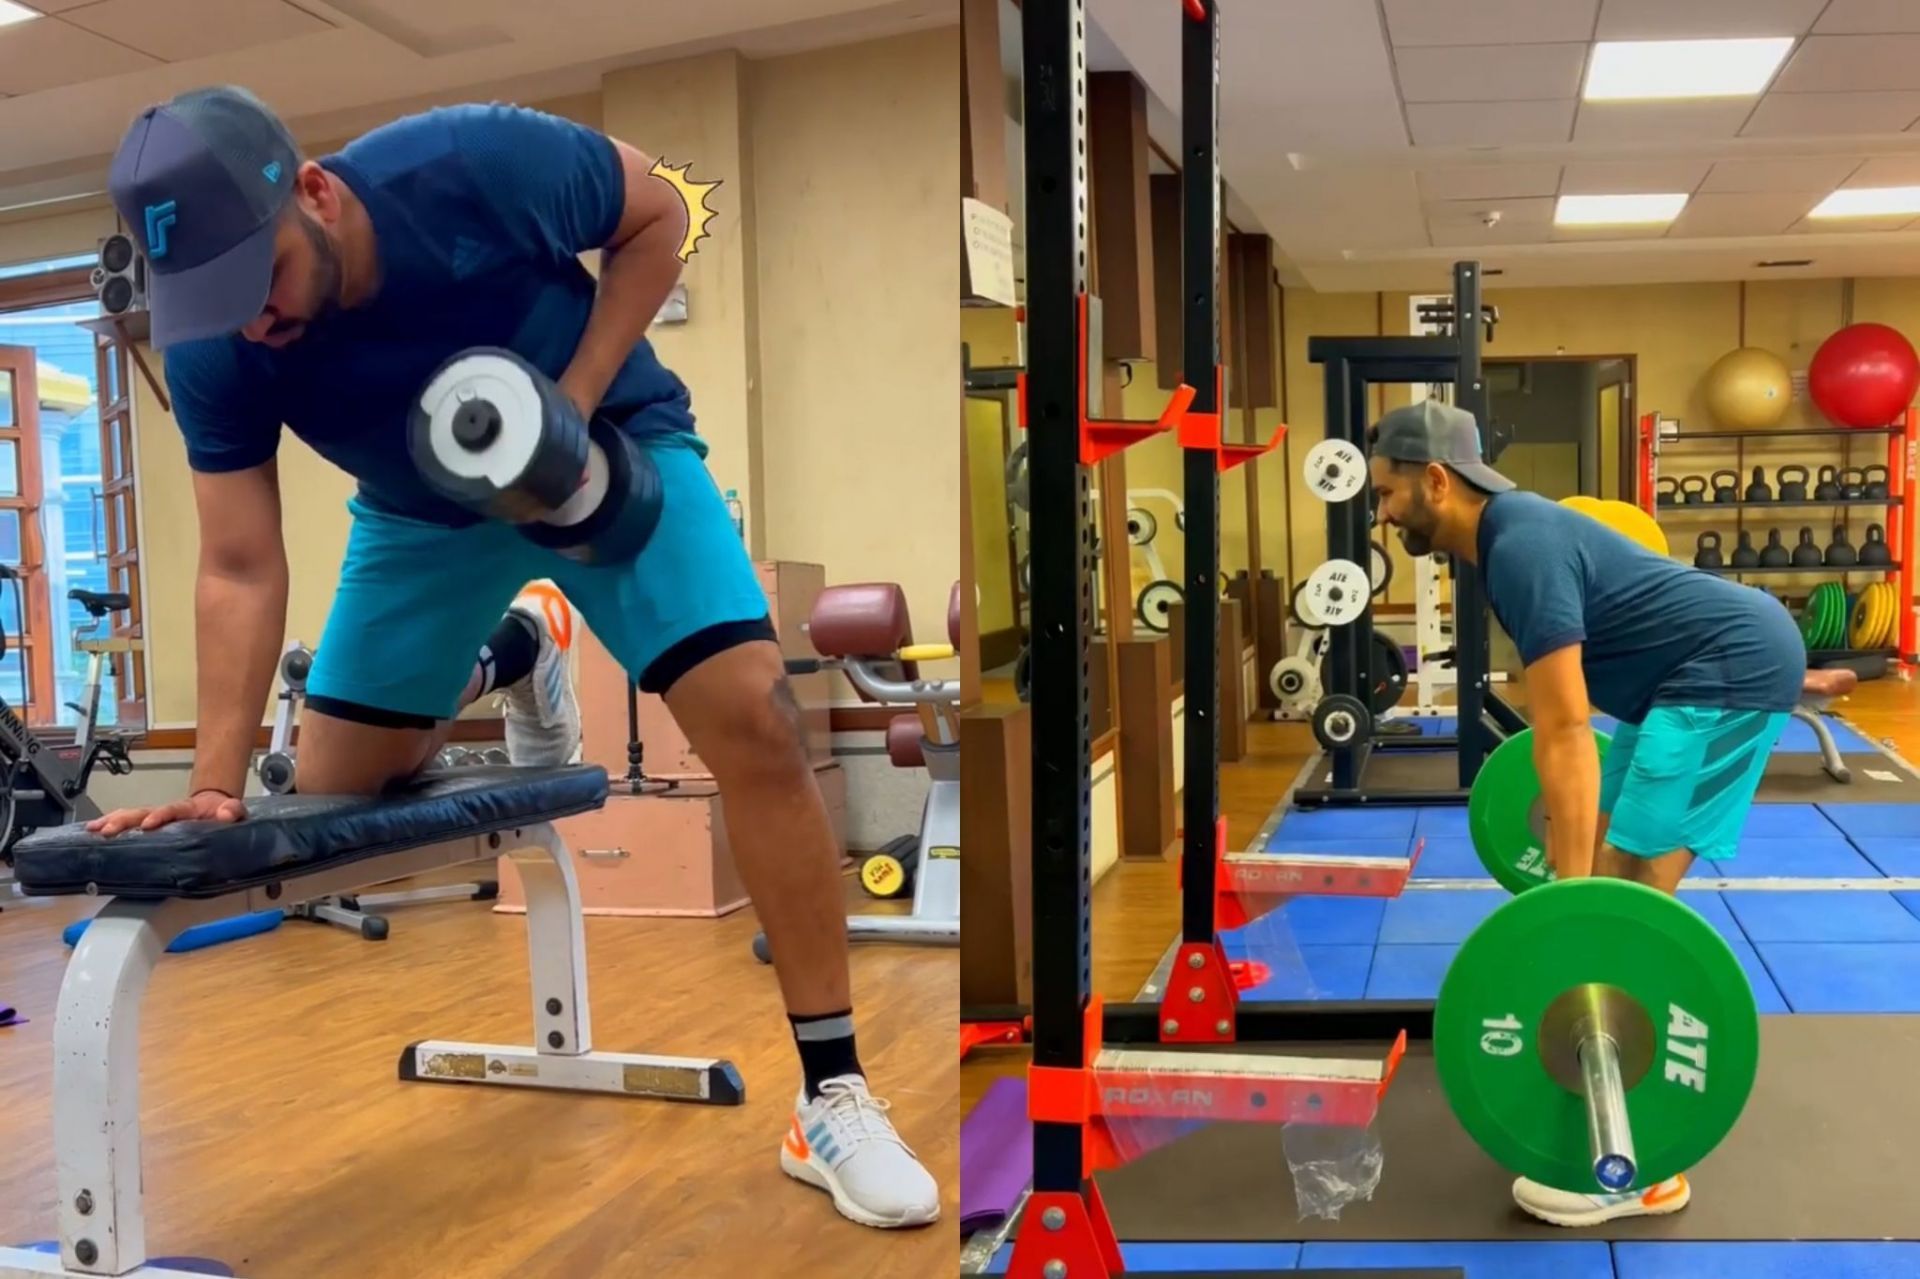 Rohit Sharma was seen hustling in the gym on Thursday.